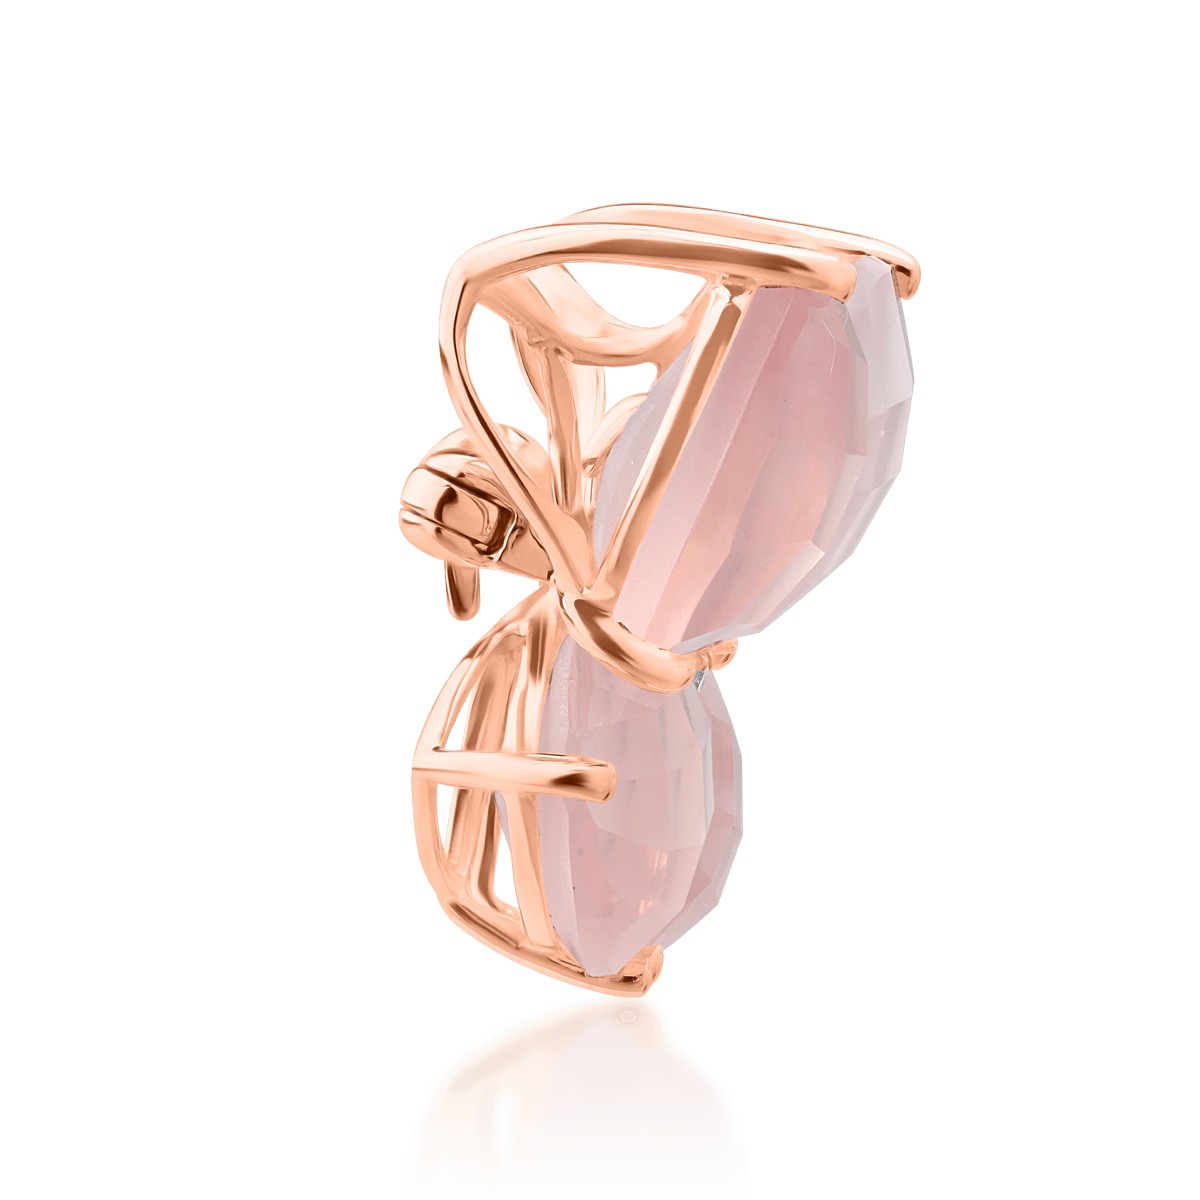 18K rose gold brooch with 11.4ct rose quartz and 0.39ct diamonds